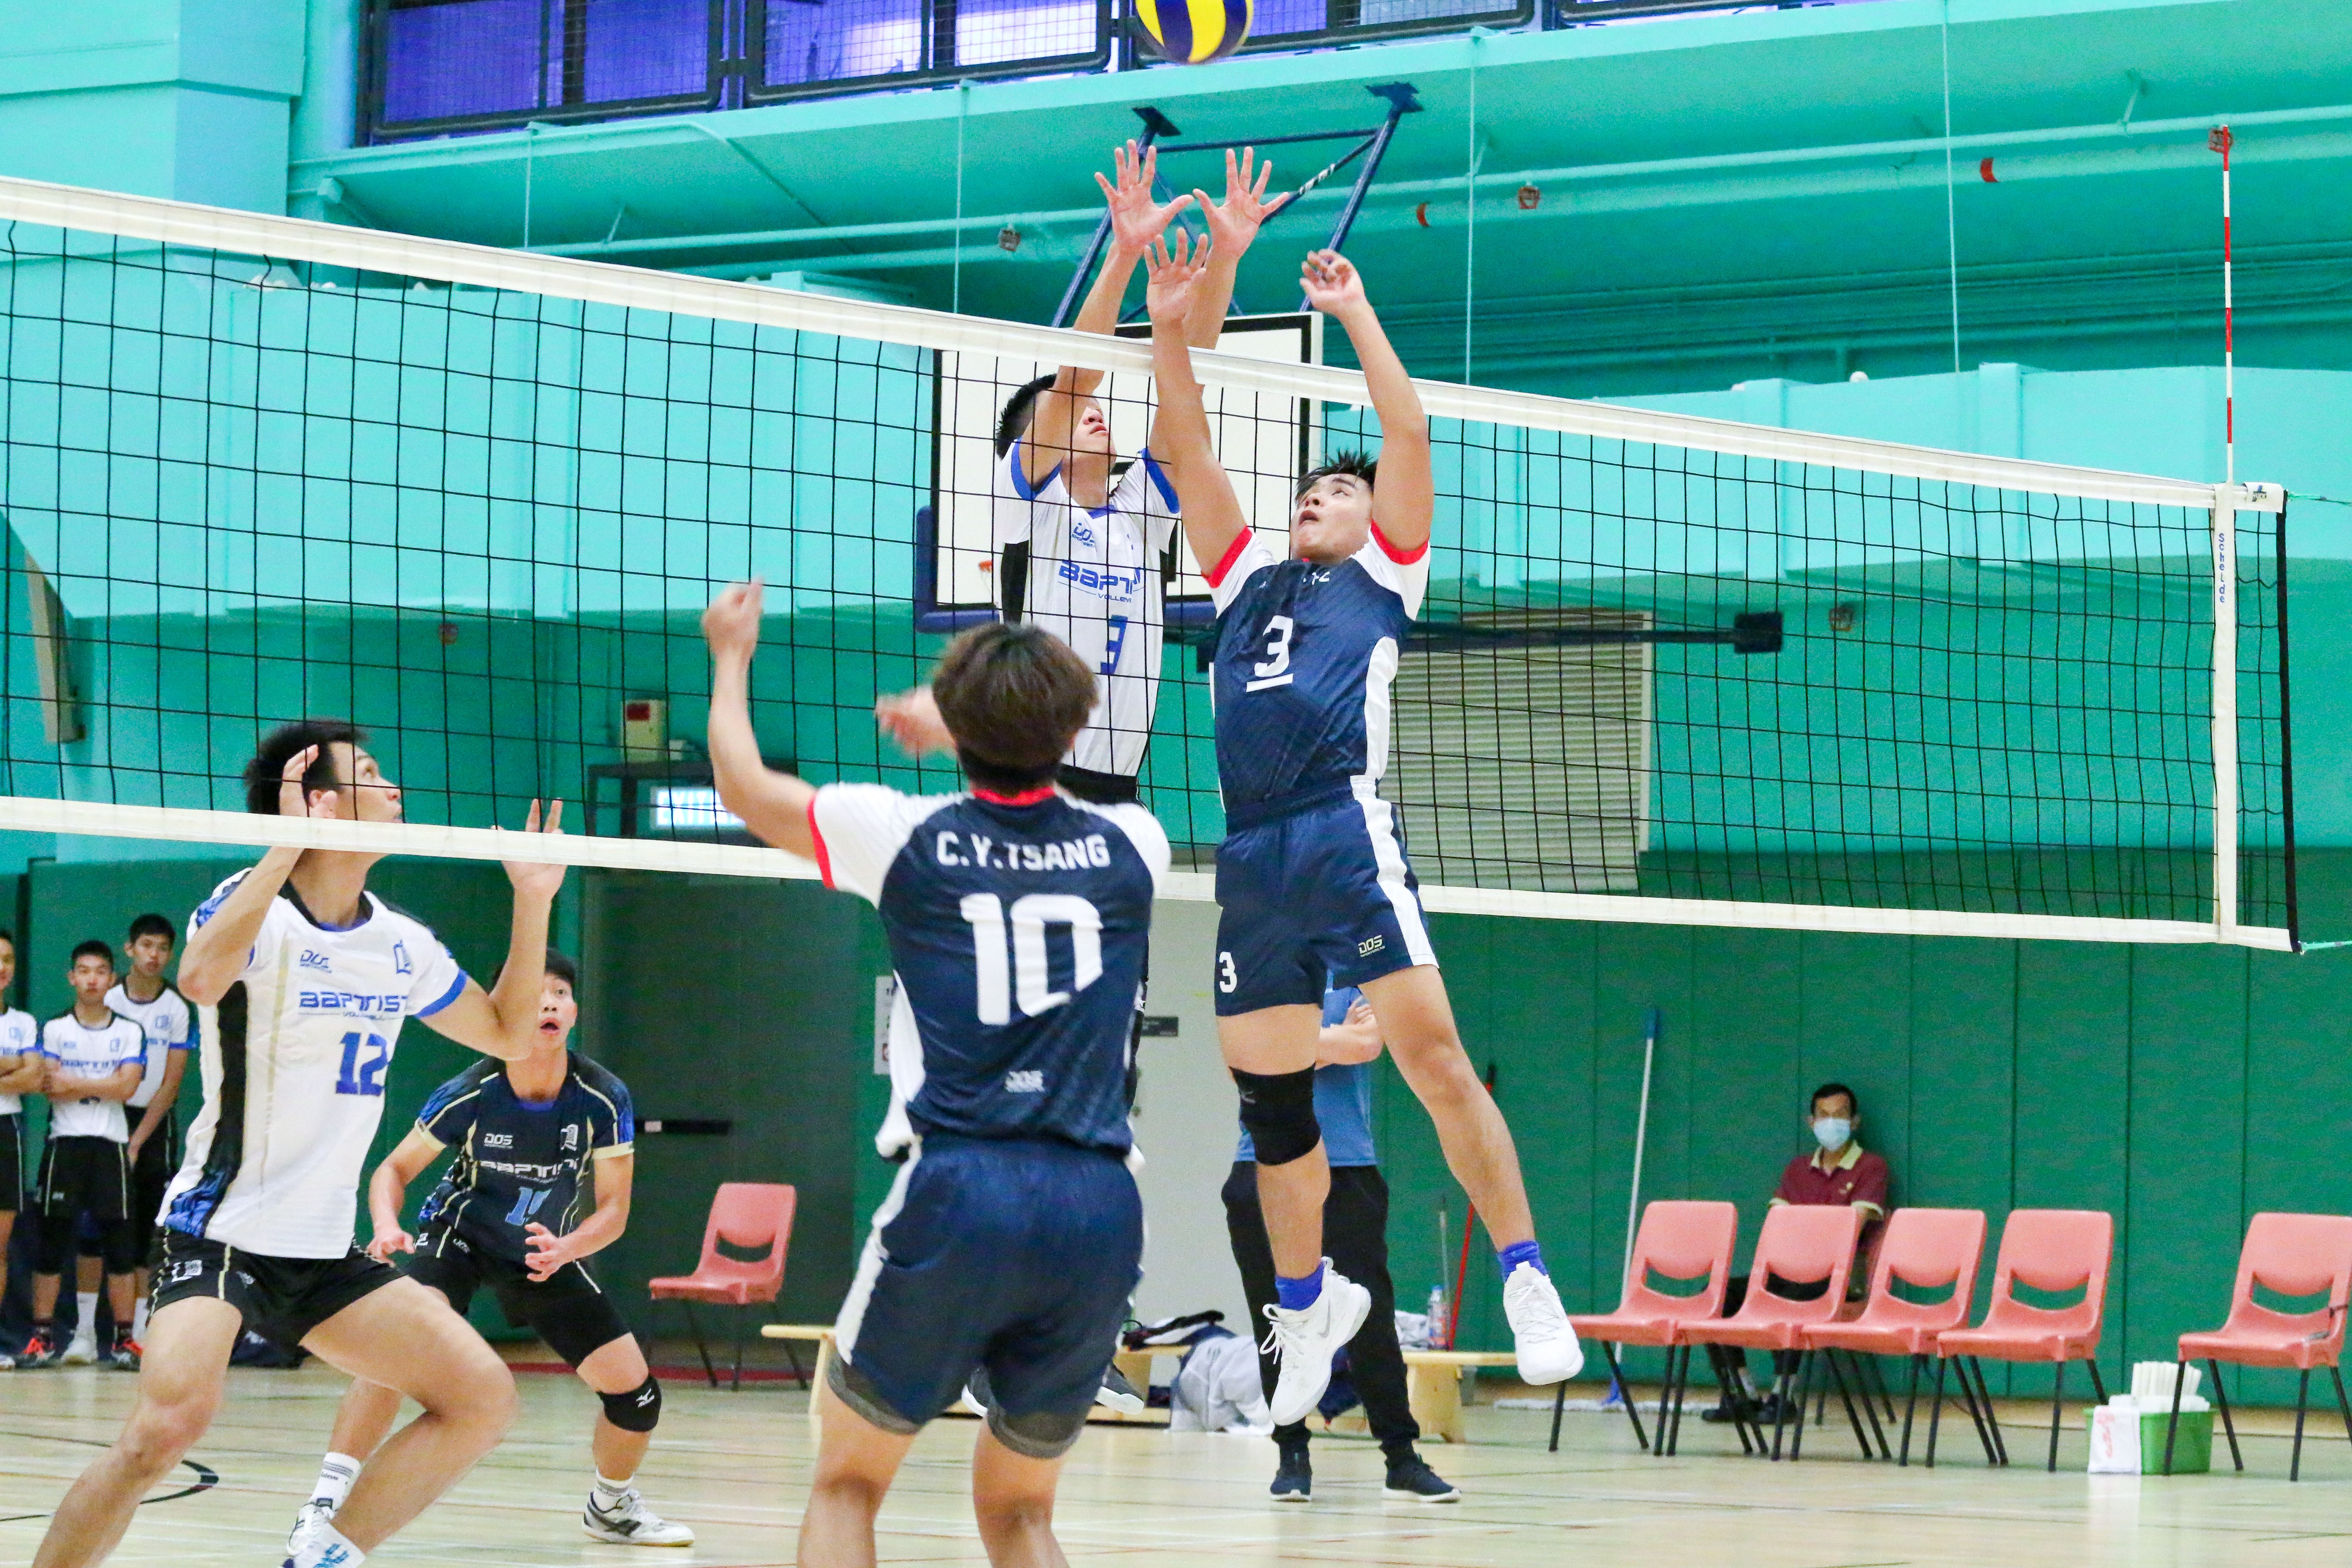 2018-19 Men's Volleyball Competition